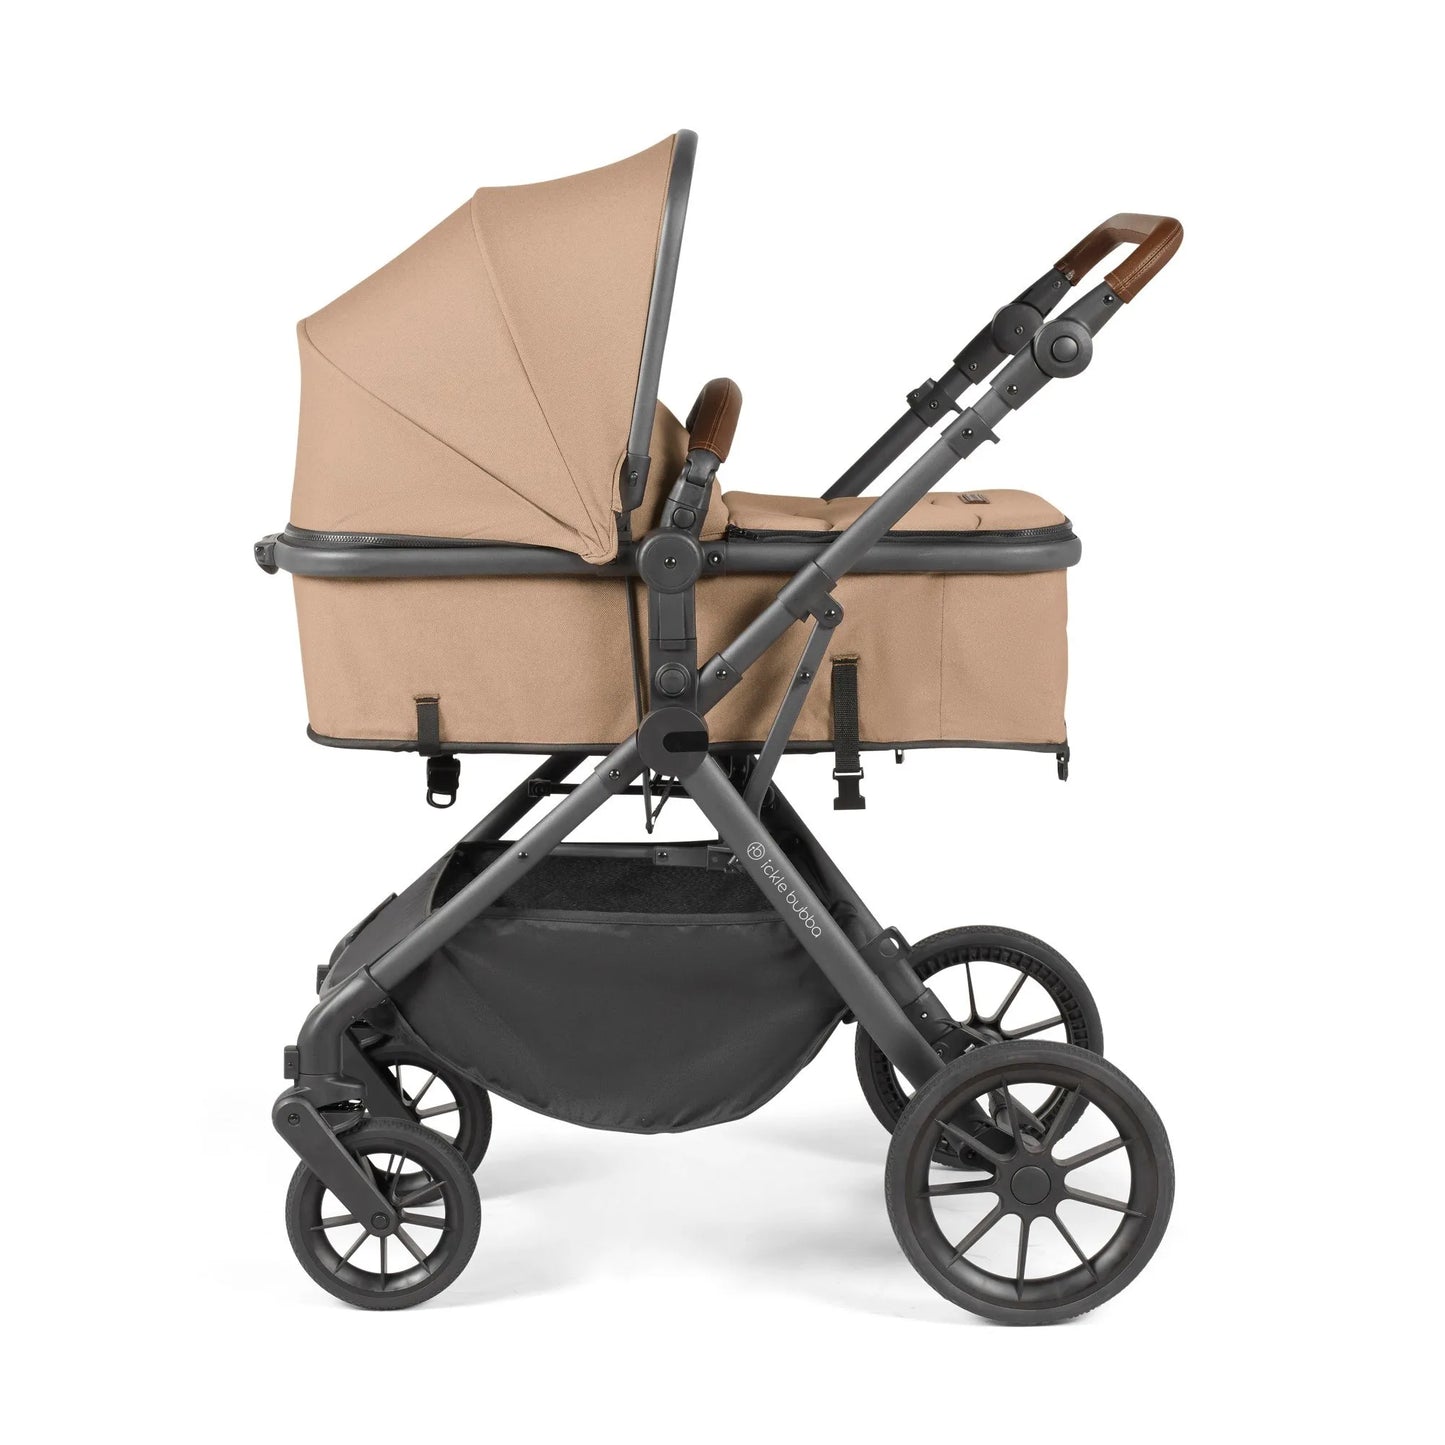 Ickle Bubba Cosmo All in One i-Size Travel System with ISOFIX Base - Desert *PRE ORDER END NOVEMBER